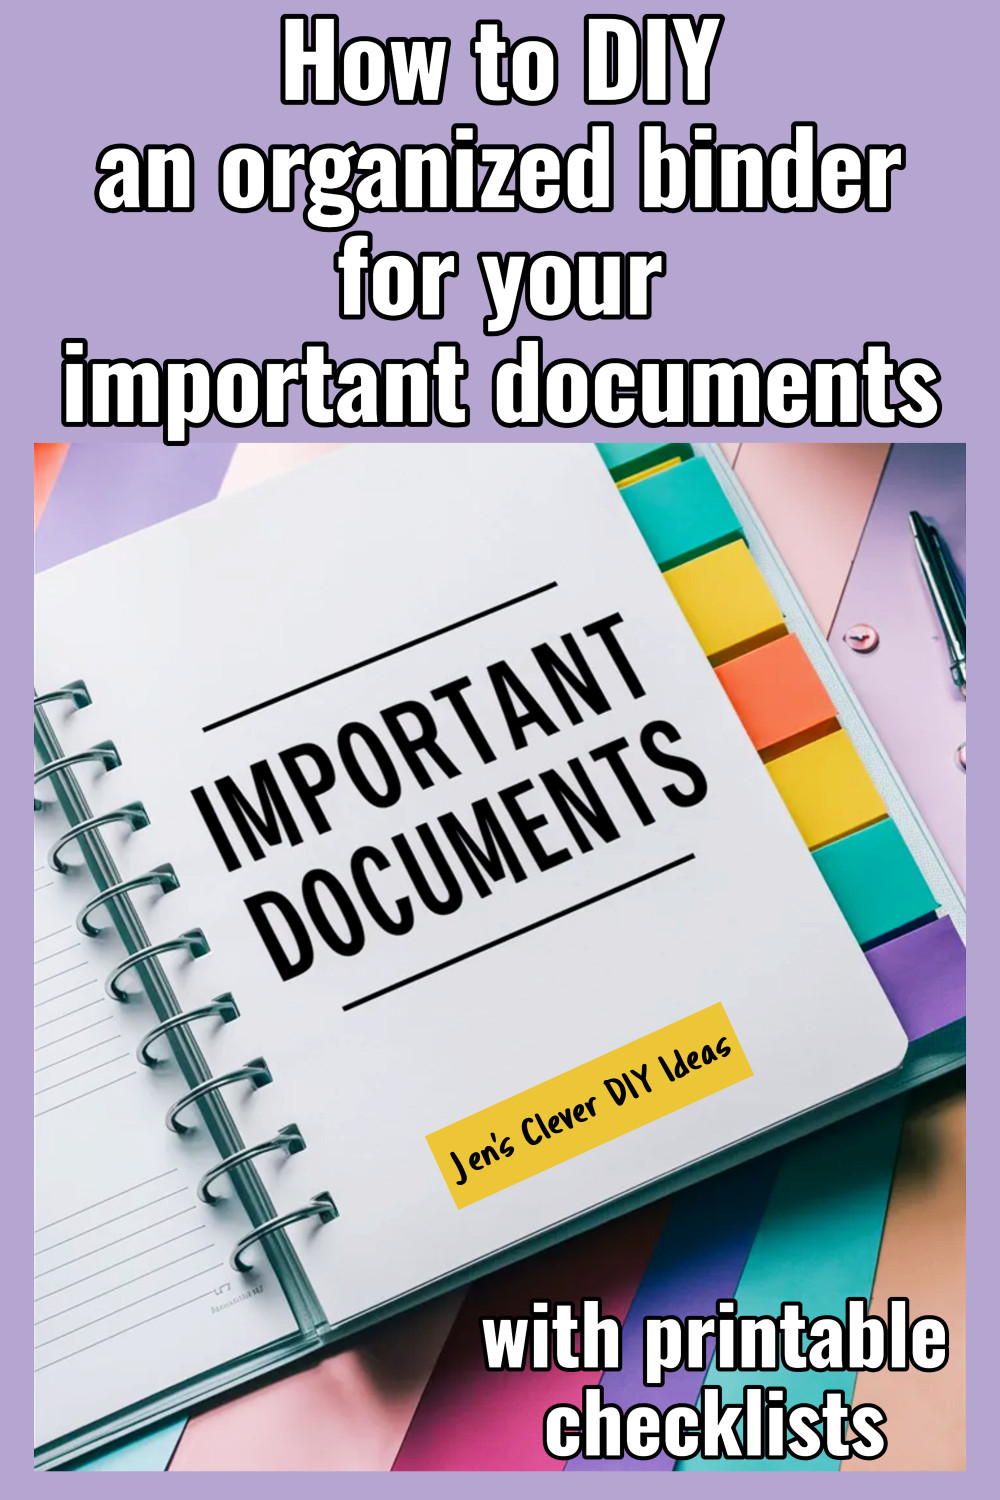 How to DIY an organized binder for your important documents with printable checklists